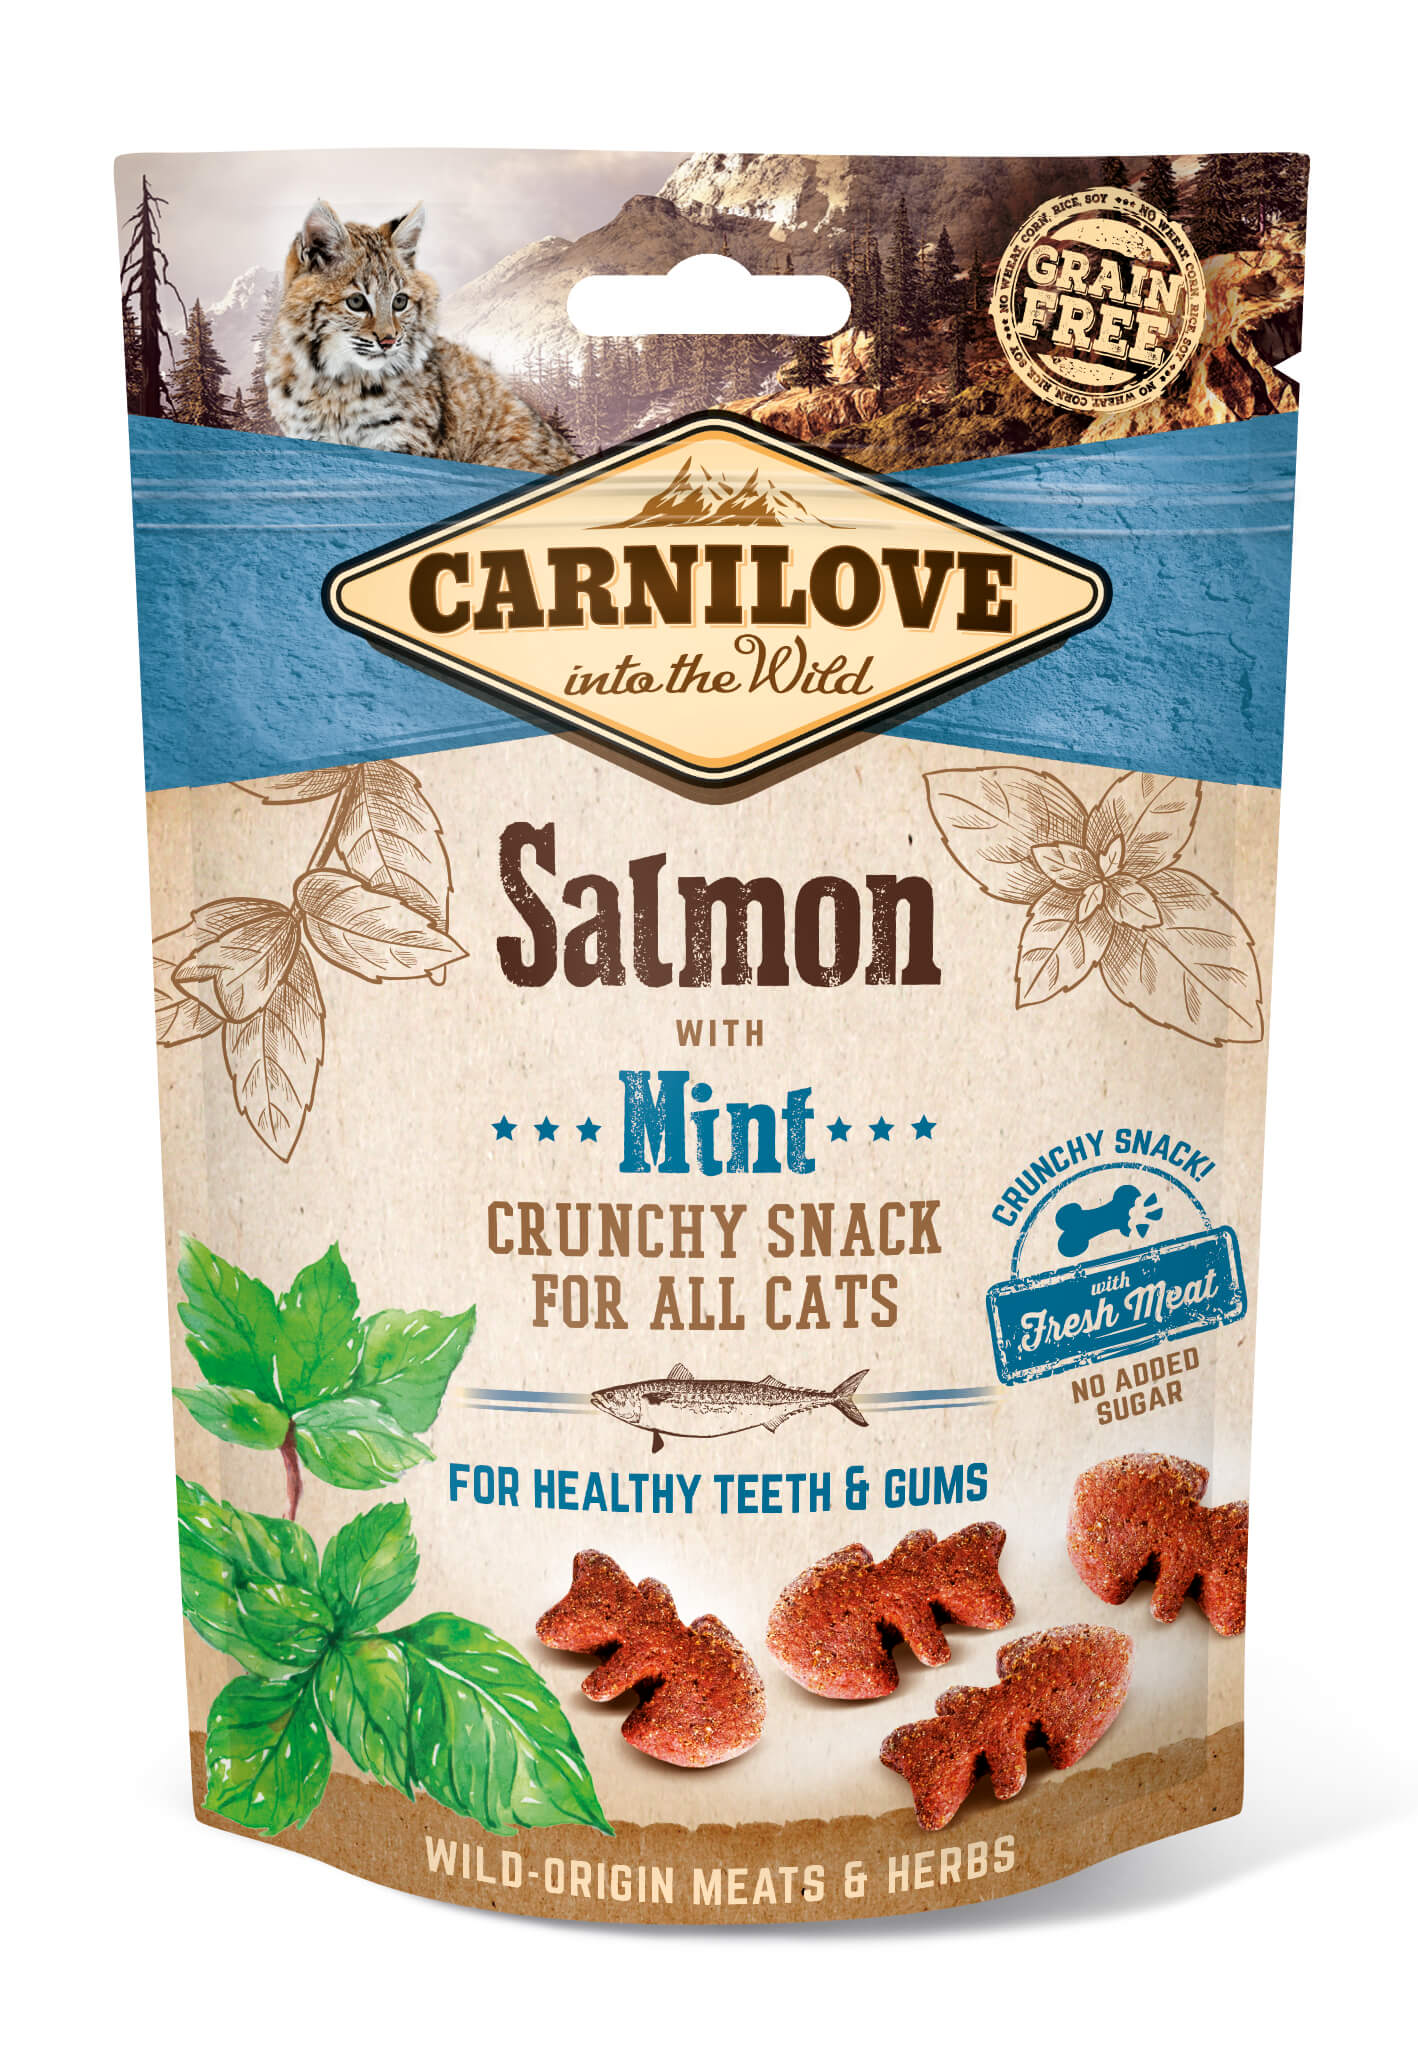 Carnilove Cat Crunchy Snack - Salmon with Mint 50g